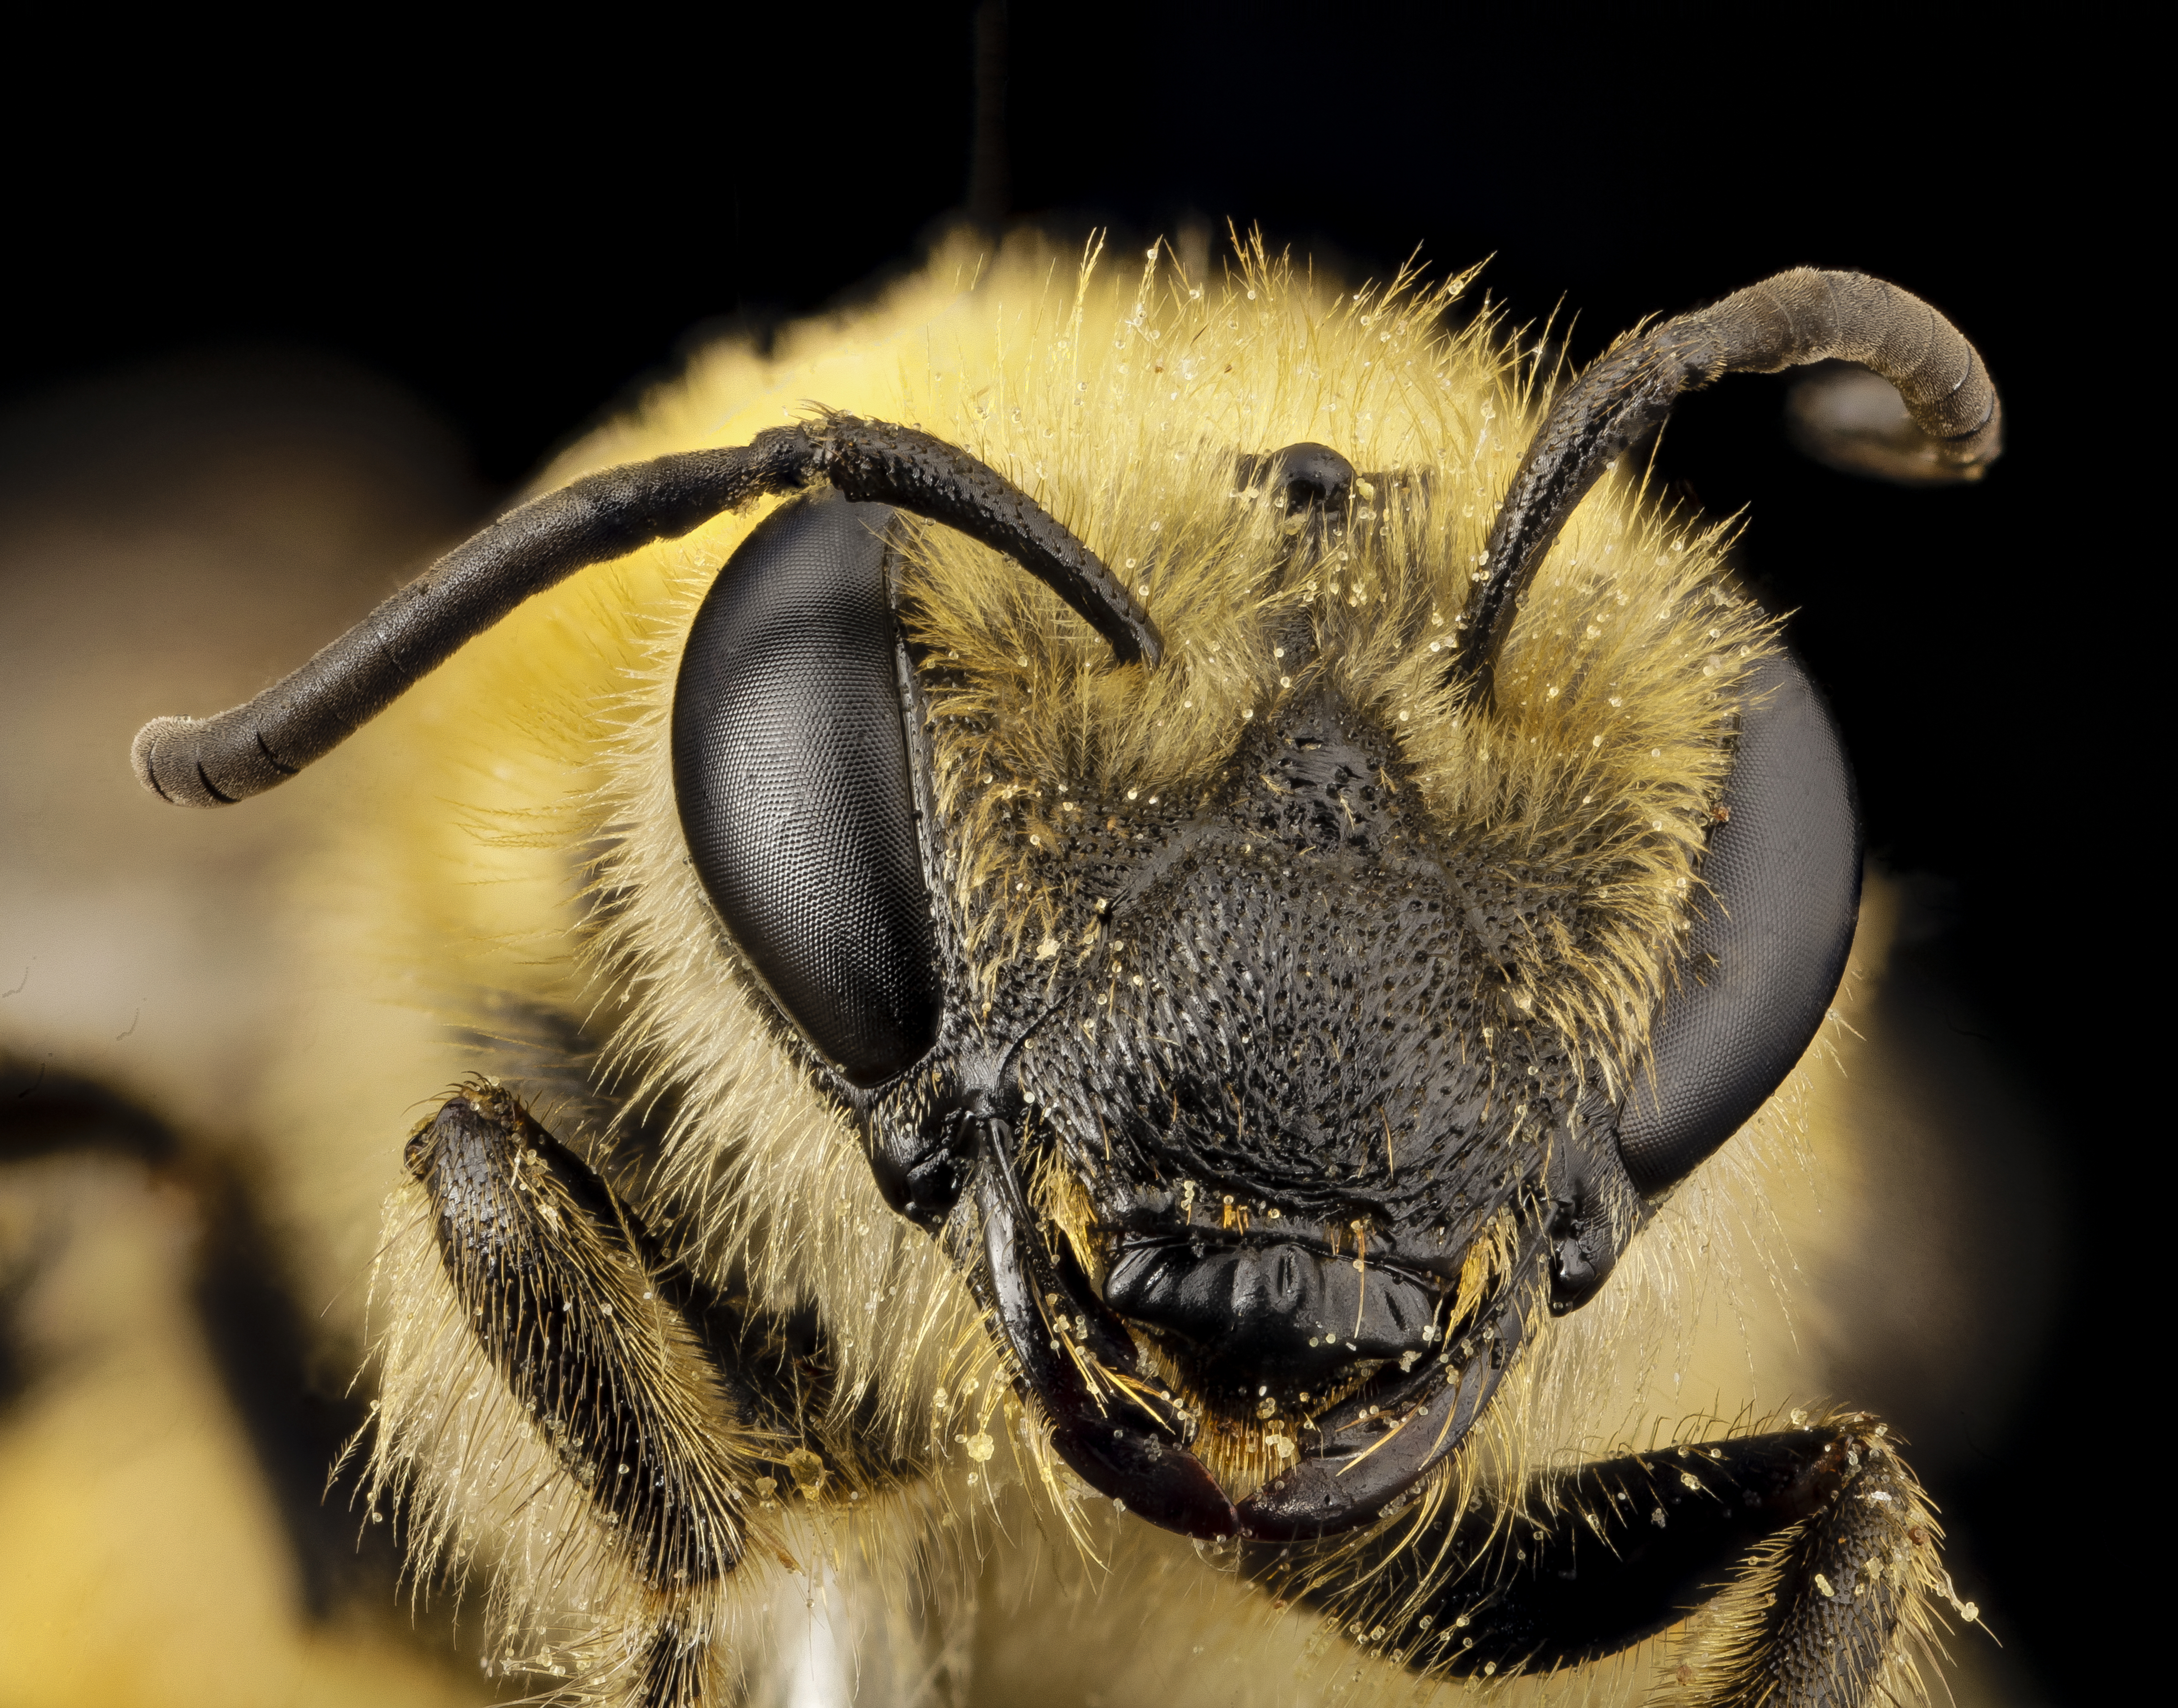 Colletes hederae, f, country unk, face 2014-08-09-18.06.18 ZS PMax (15126328515)